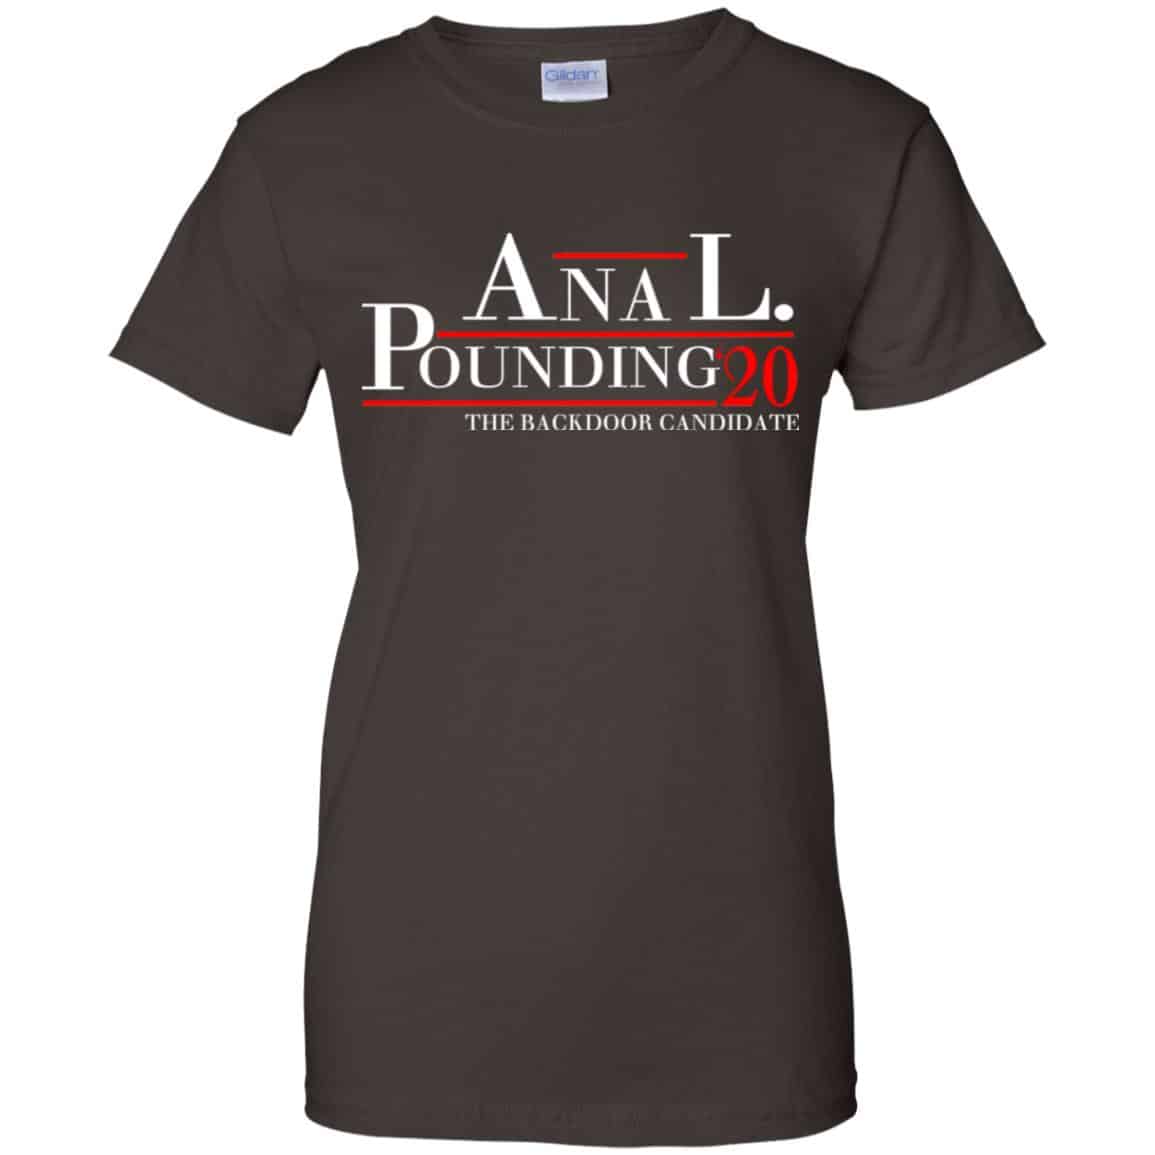 Anal Pounding 2020 The Backdoor Candidate T Shirts Hoodie Tank 0stees 